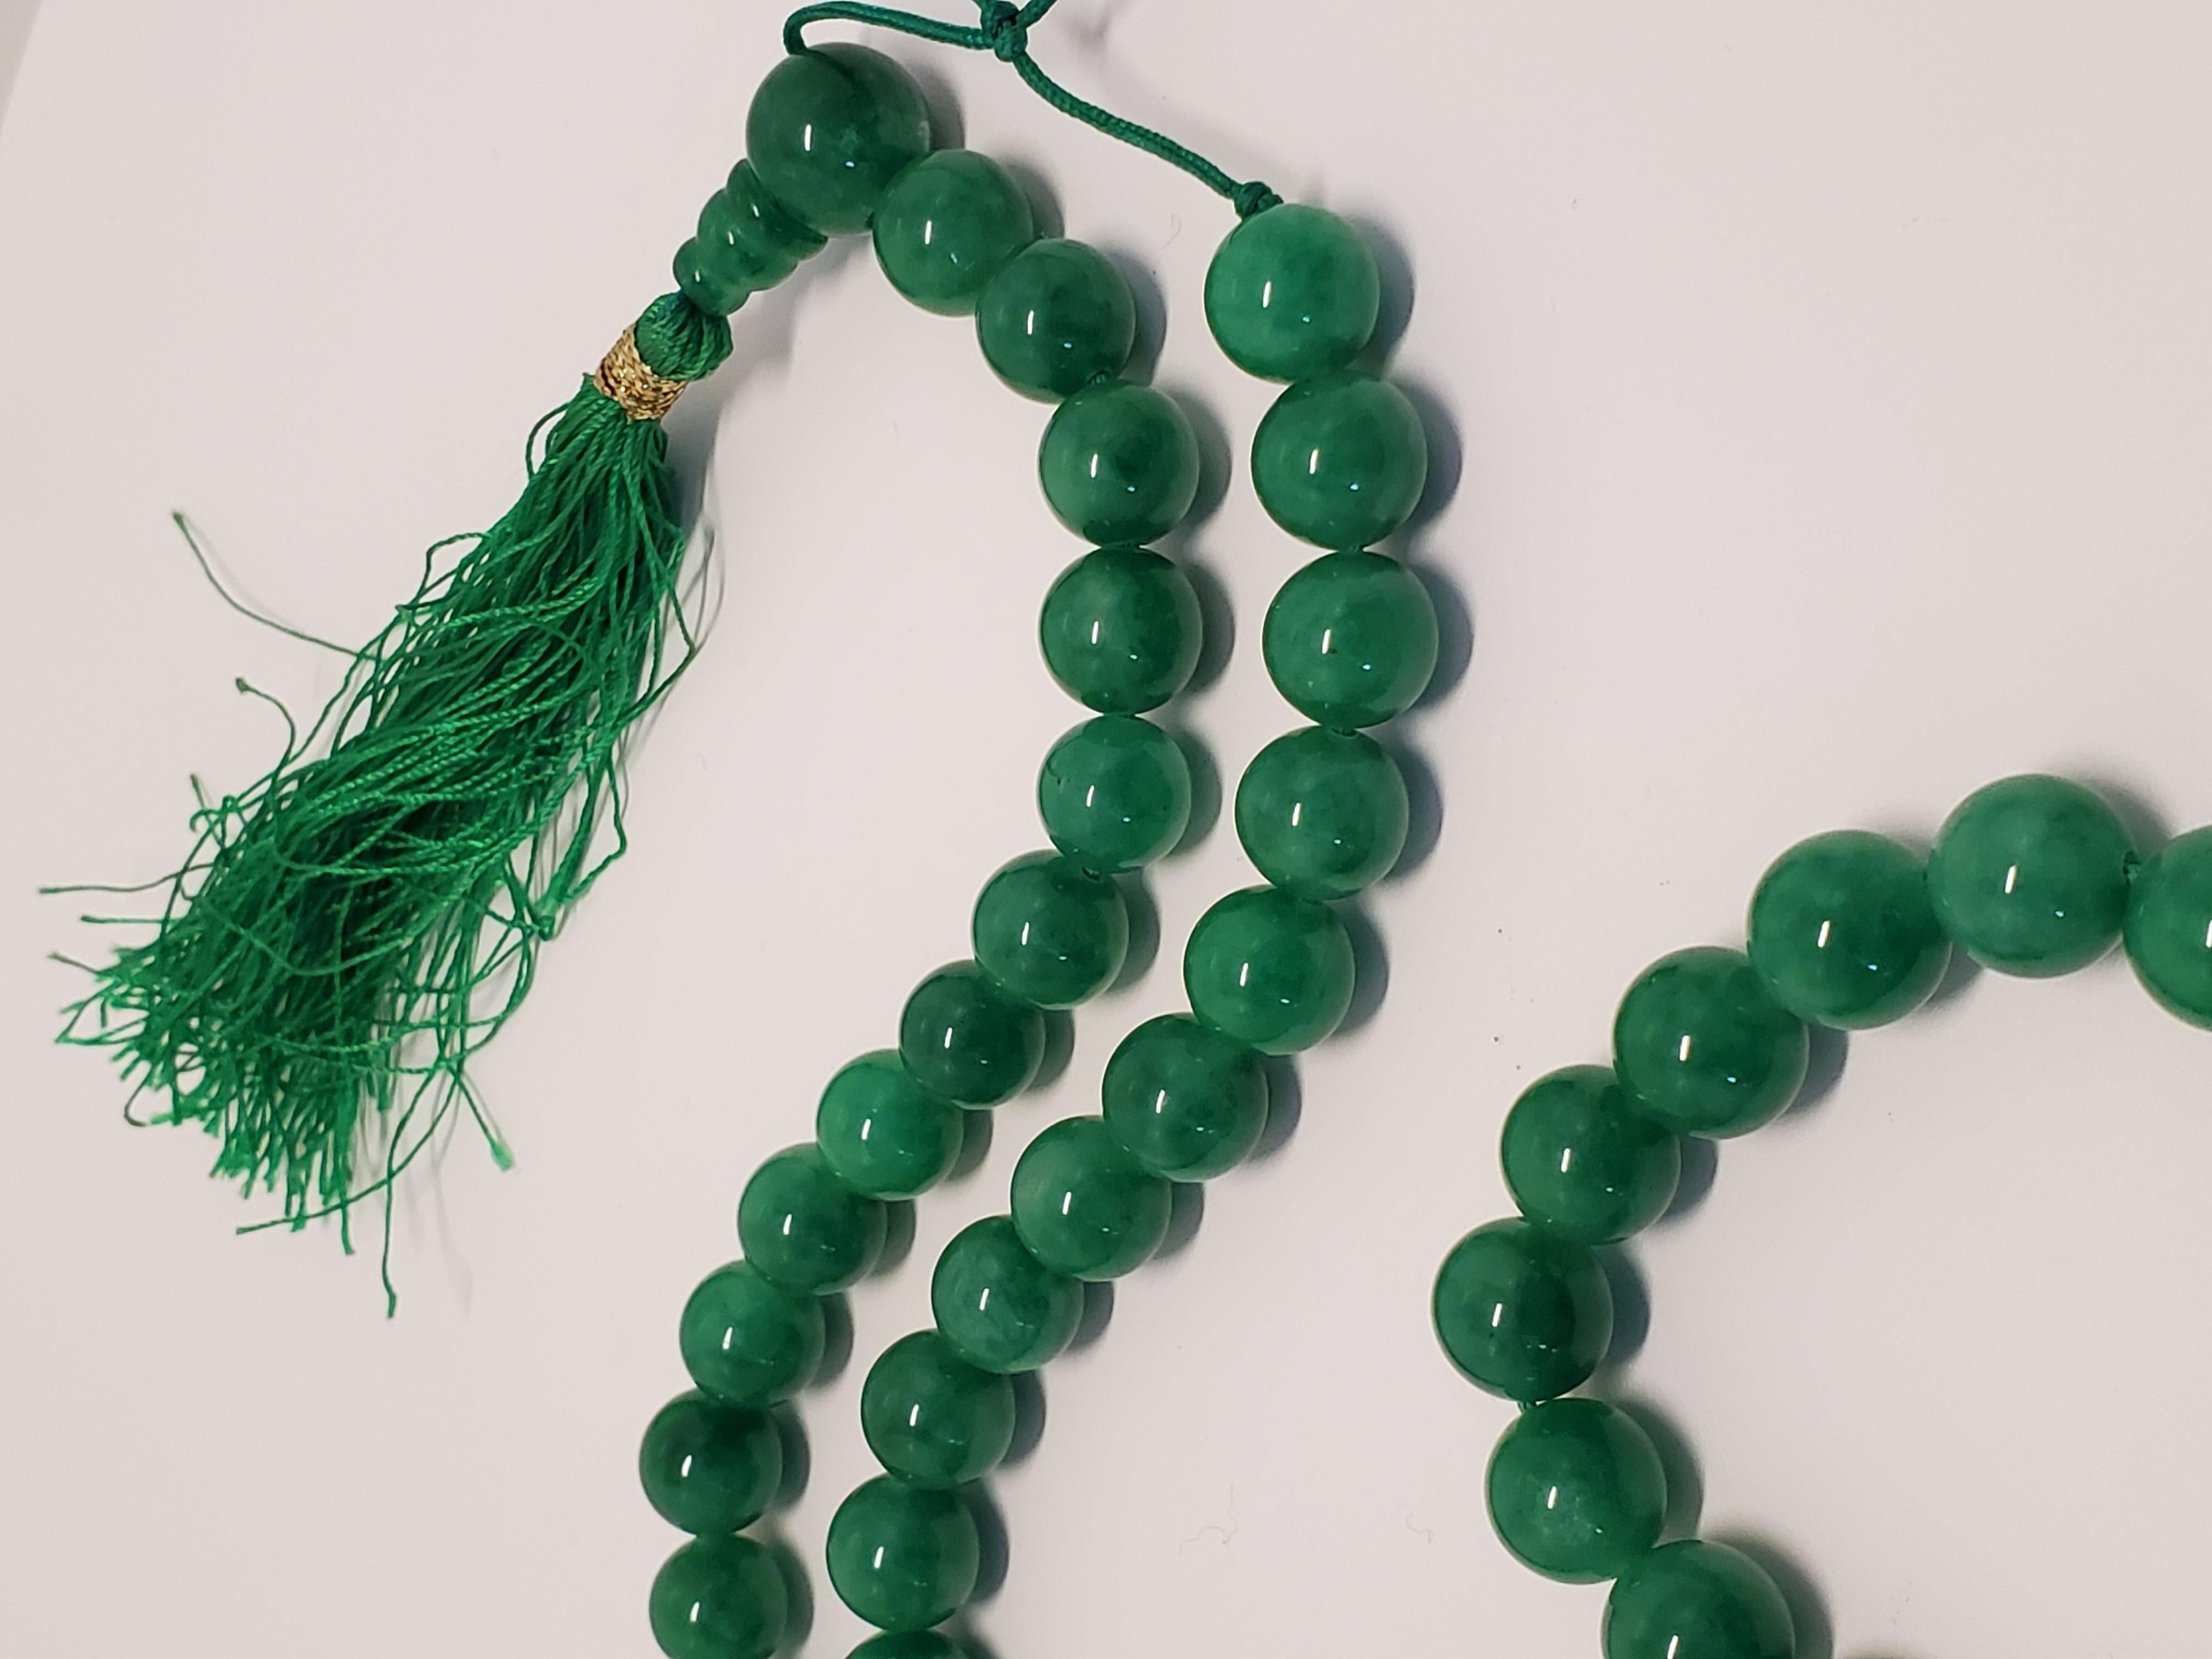 This vintage or antique necklace of emerald green jadeite beads, also known as mala or prayer beads, are a delight to handle. This necklace consists of a strand of 67 round jadeite beads, each 10 mm in diameter and uniform in shape and size. The